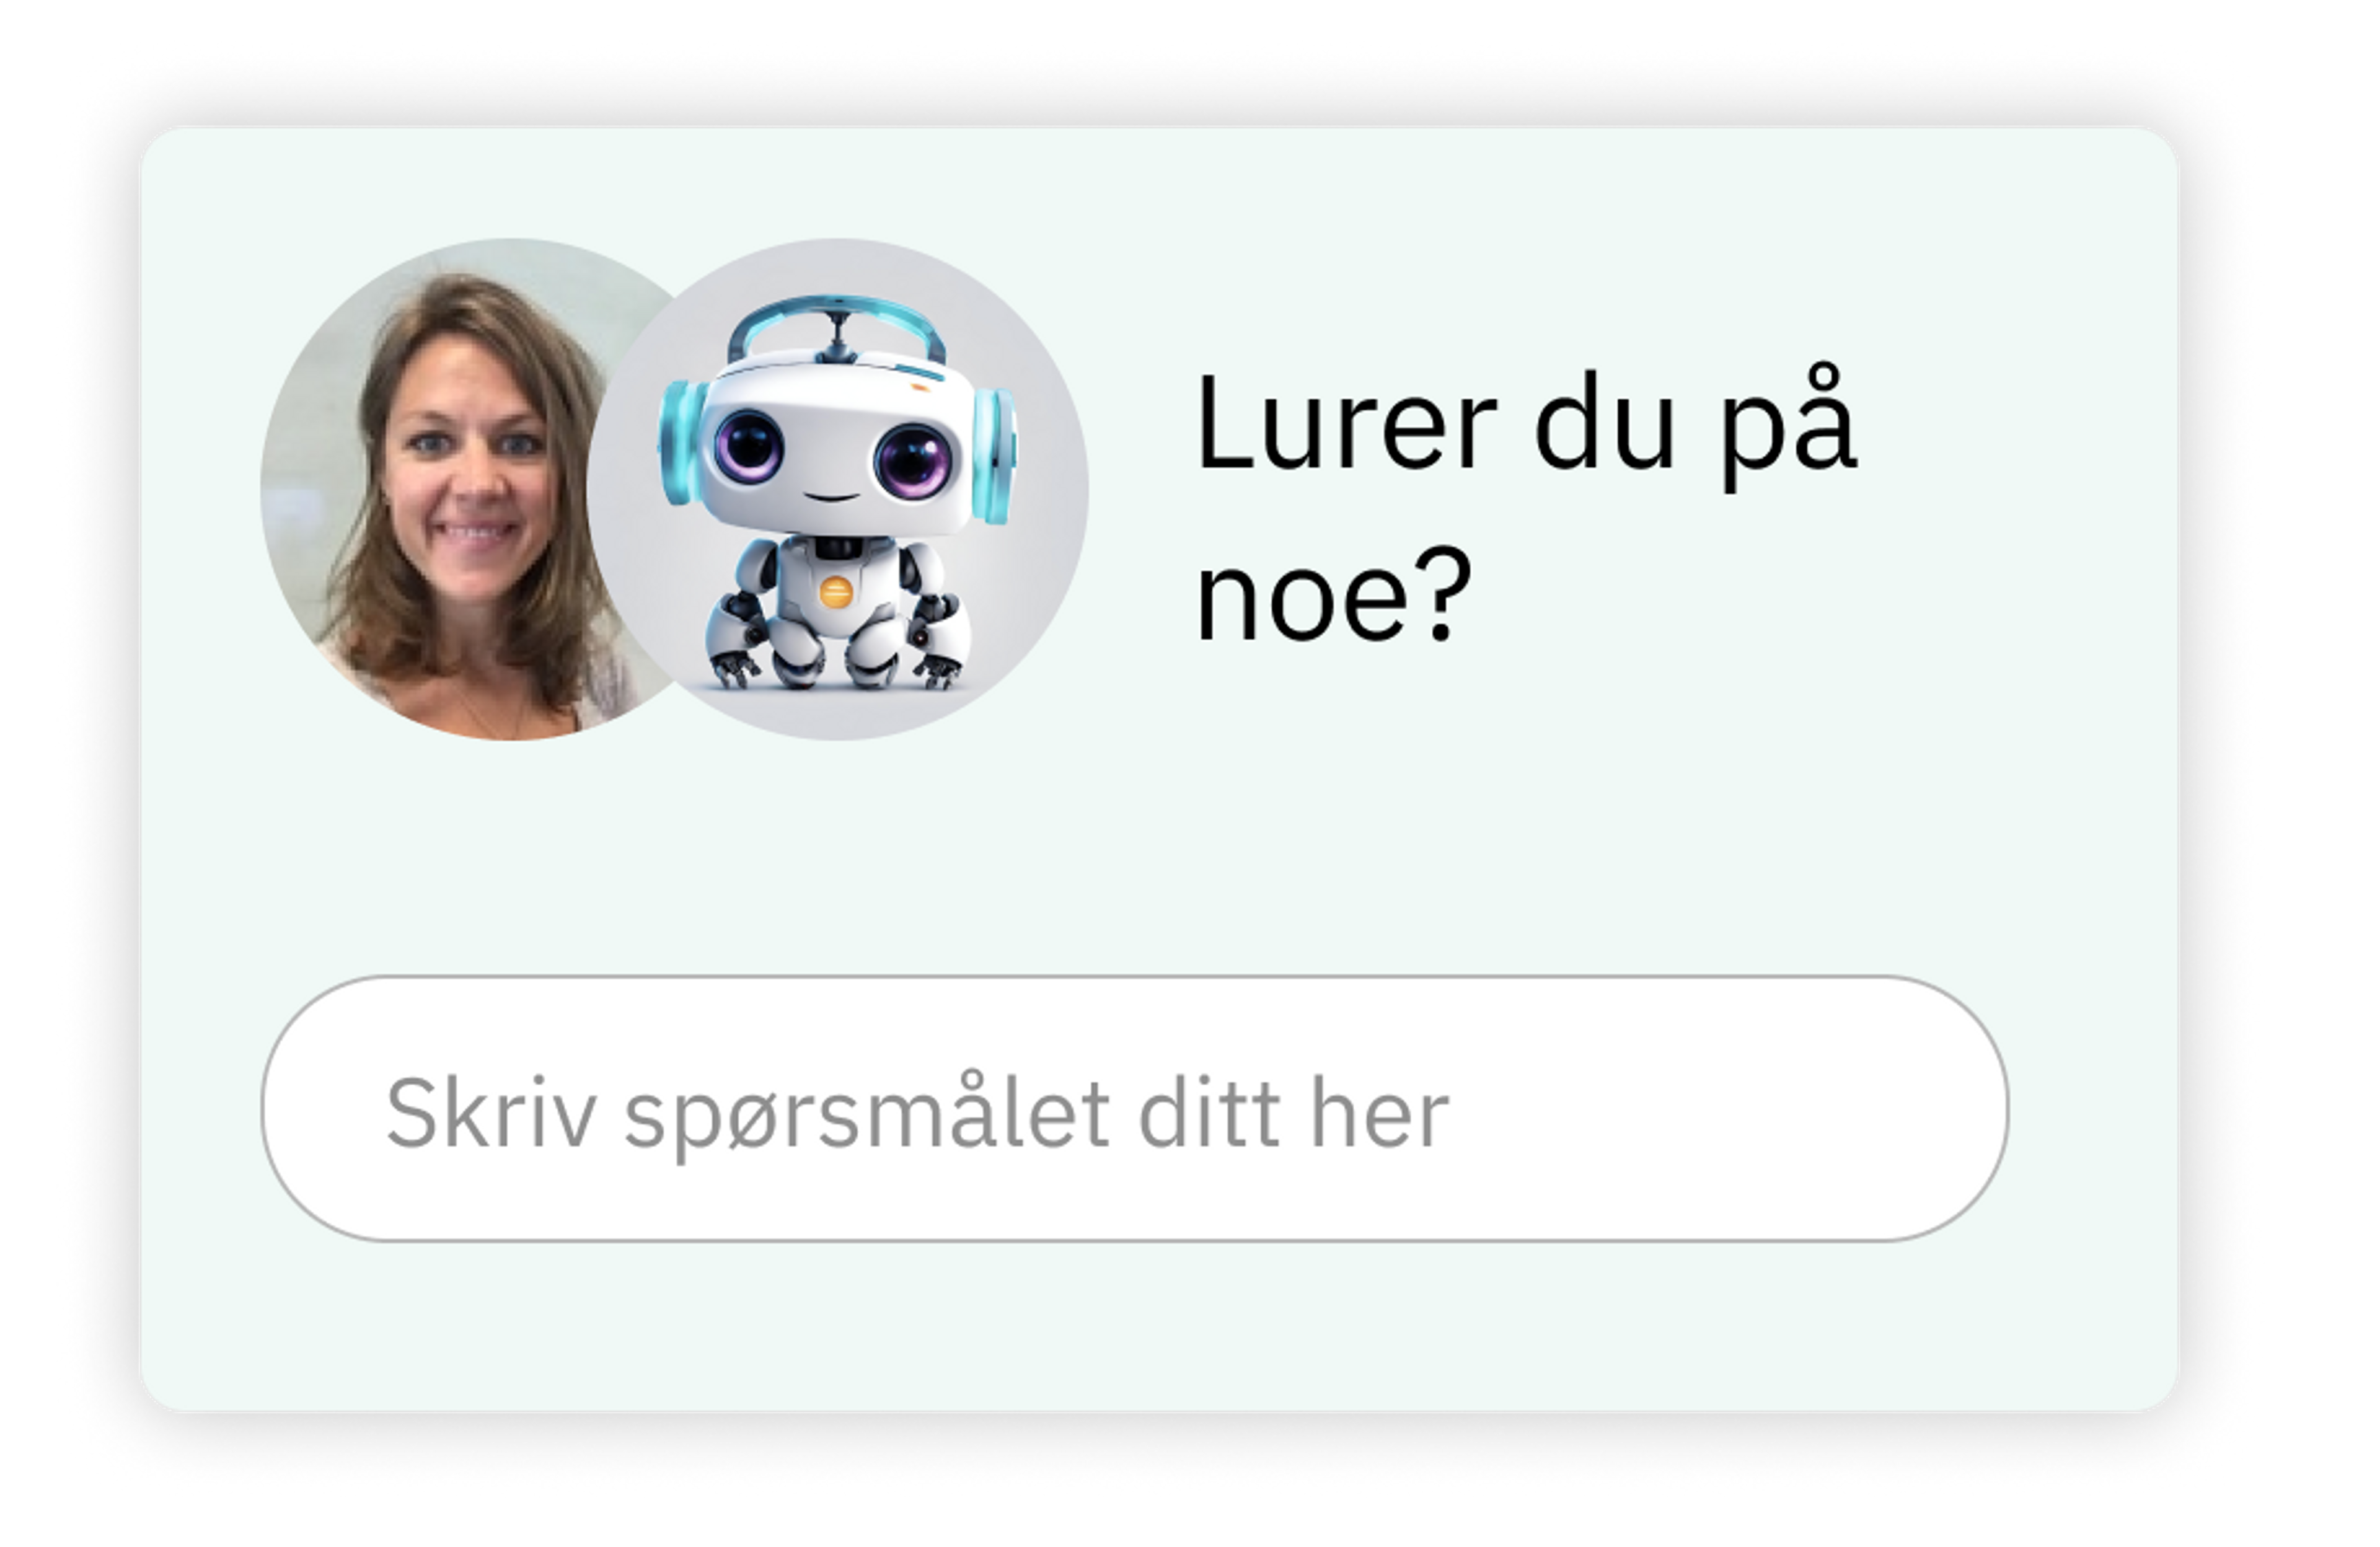 Merete Nygaard på Techpoint